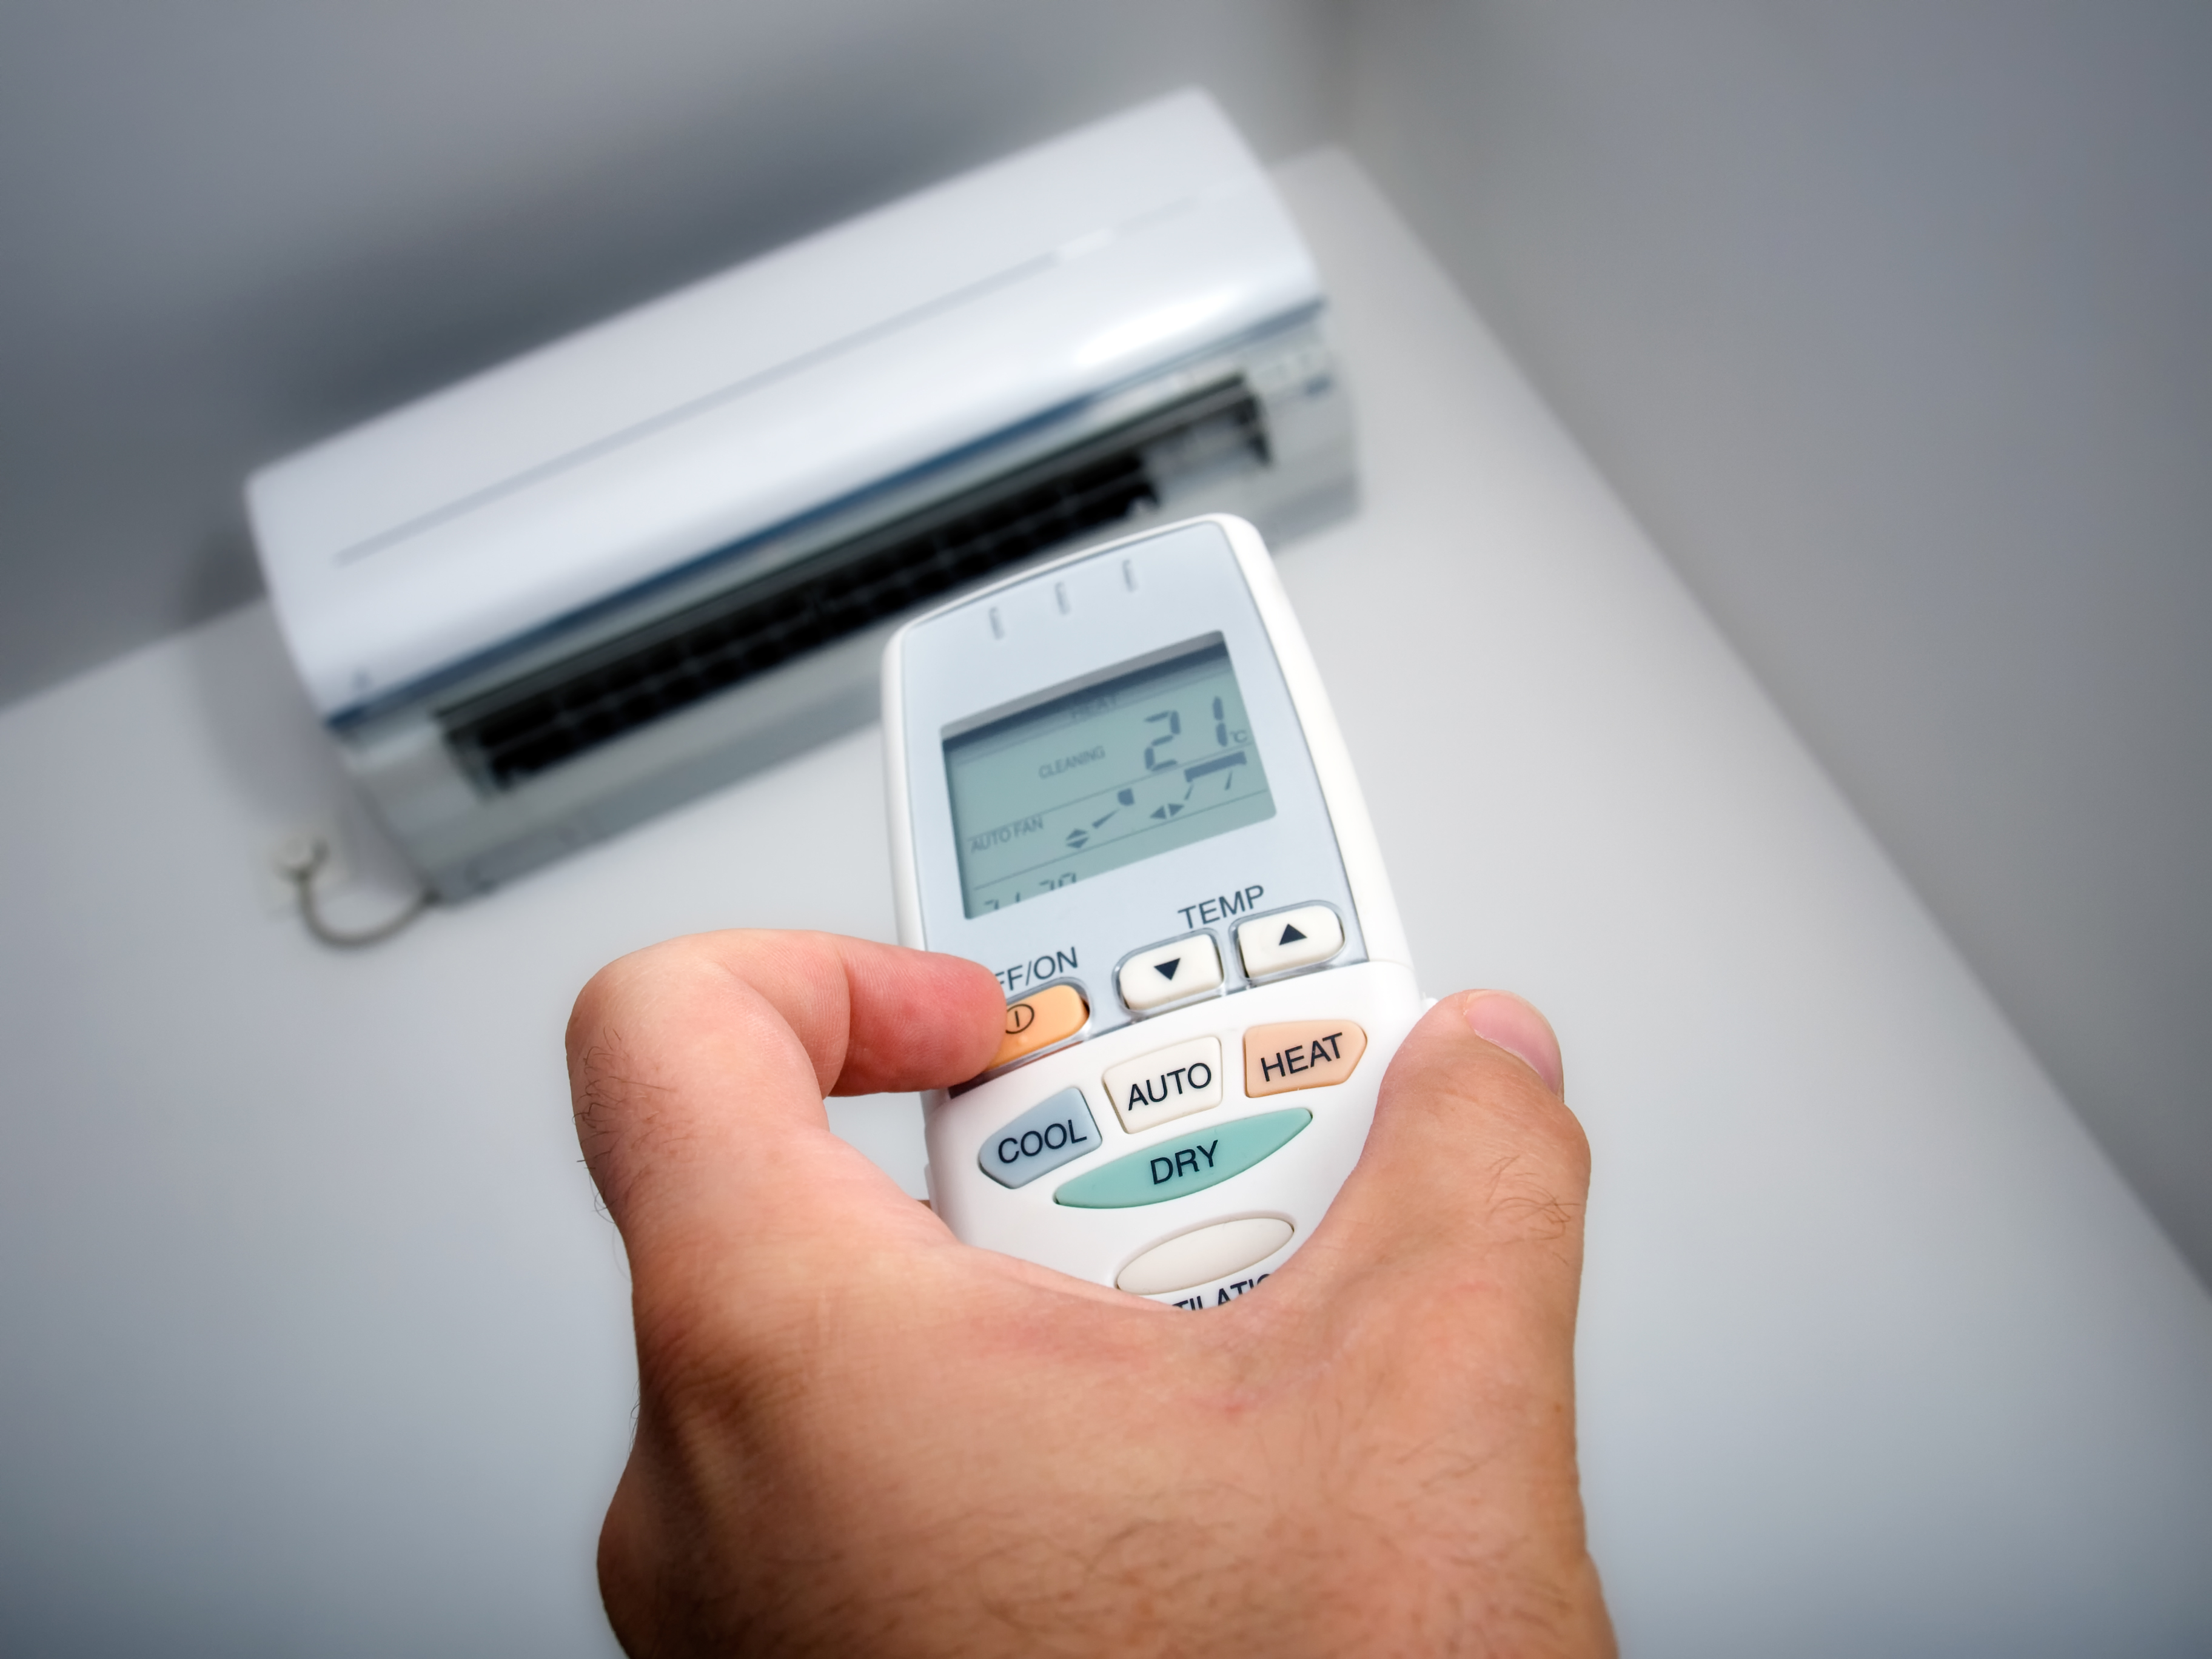 Types of remote controls for the air conditioner: wired, wall-mounted